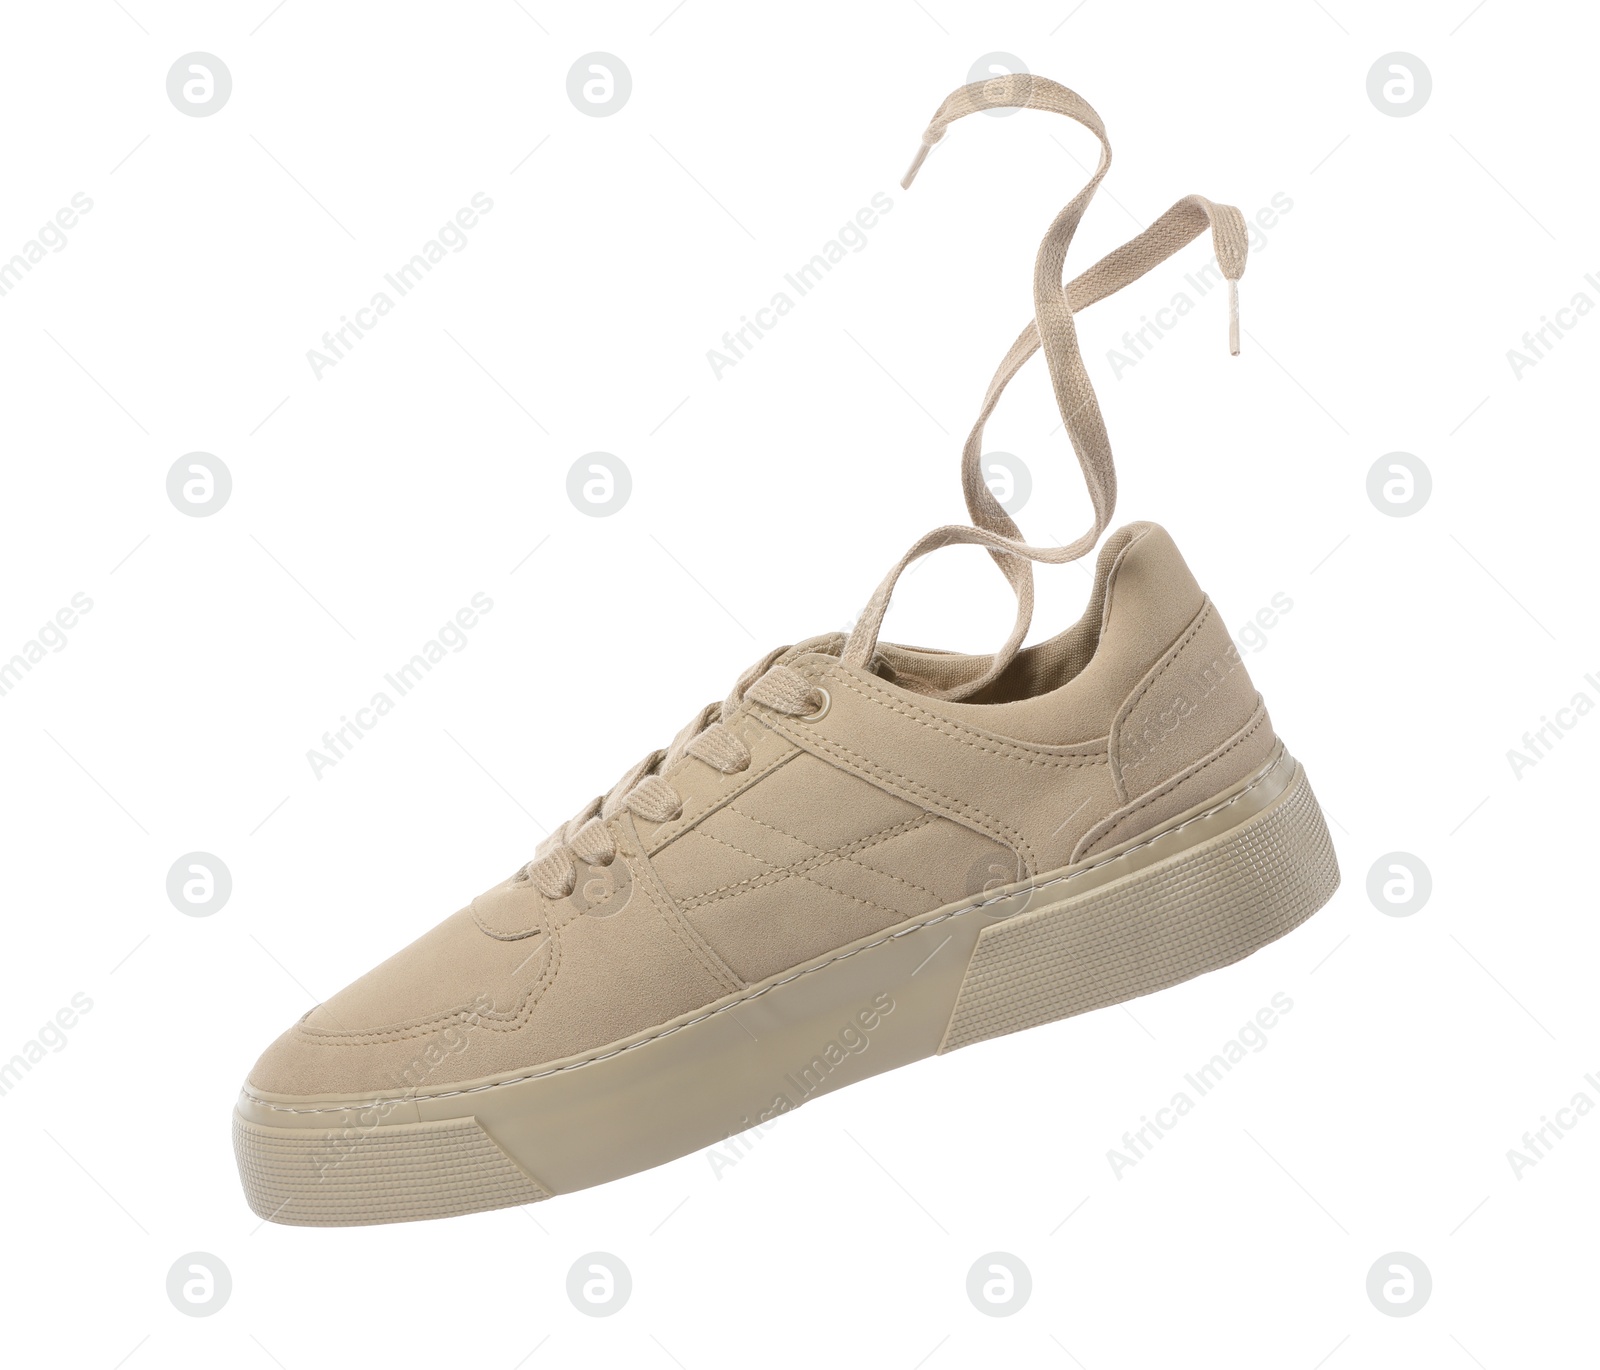 Photo of One stylish beige sneaker isolated on white